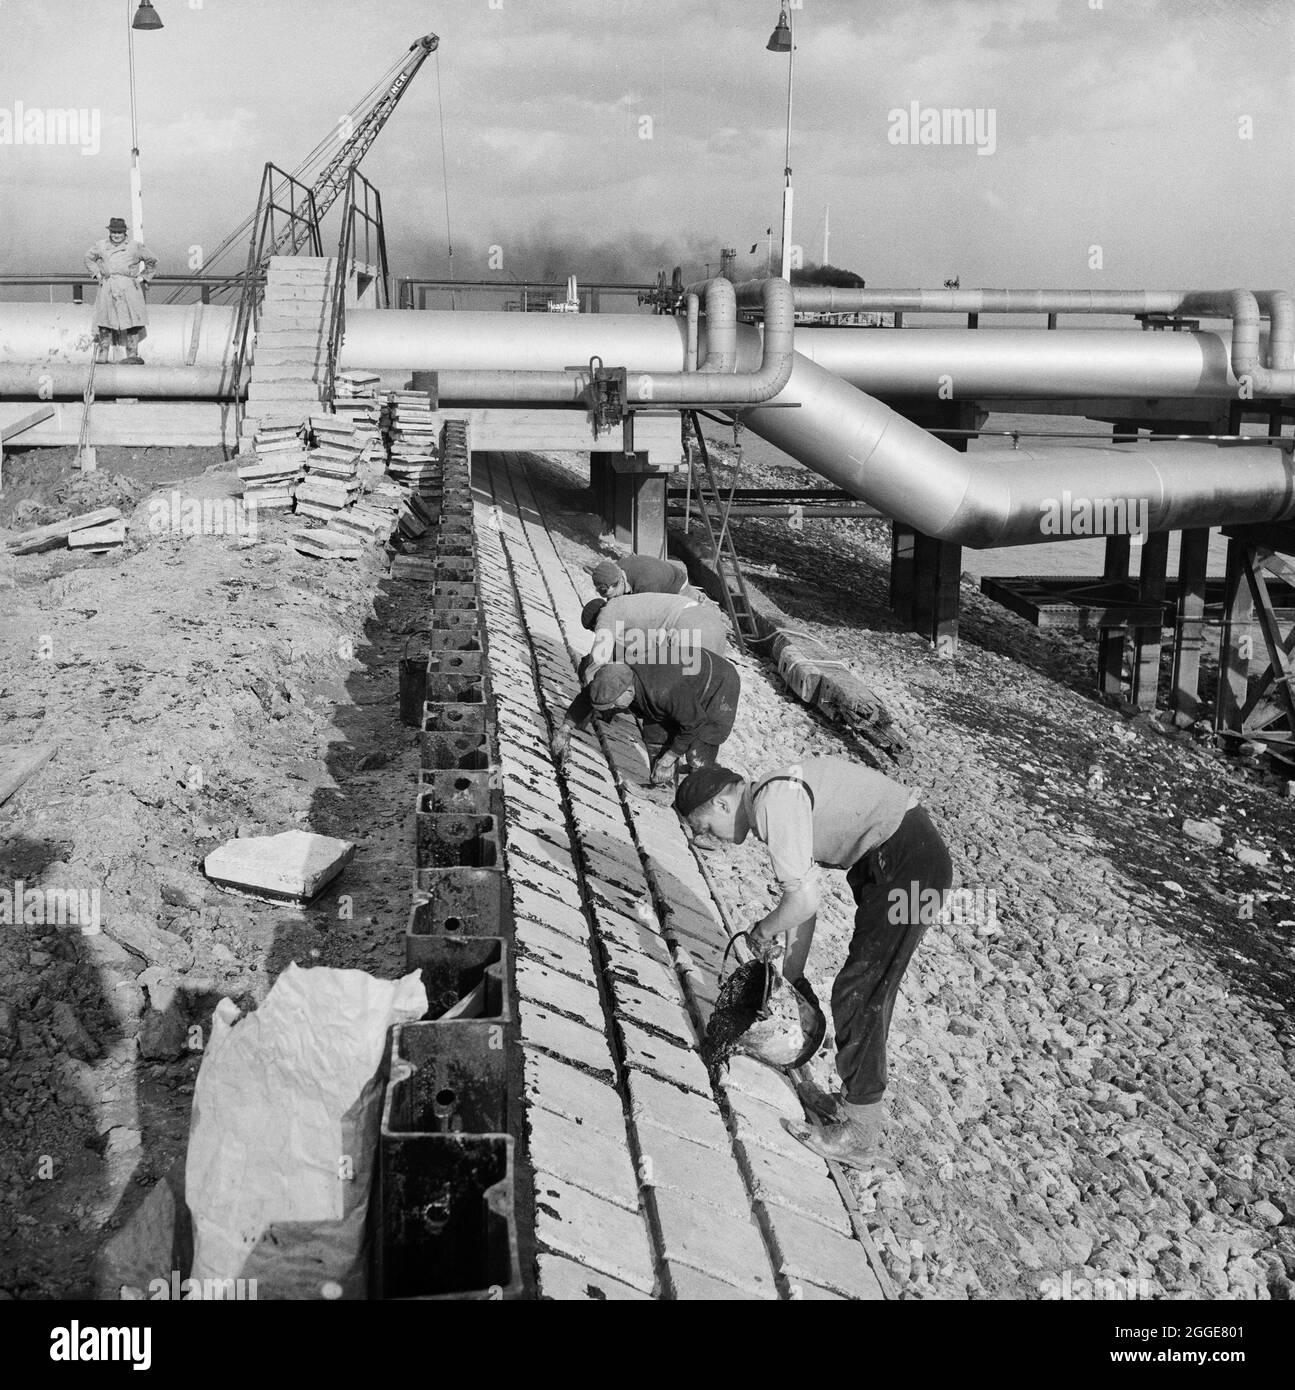 Workers constructing a protective wall of precast concrete blocks at Coryton Oil Refinery, as part of extensive flood prevention work at the site. On the night of Saturday 31st January through to the morning of Sunday 1st February 1953, severe floods struck parts of the UK, Scotland, Belgium and the Netherlands. The natural disaster is often referred to as the North Sea Flood of 1953. Severe flooding occurred along the east coast of the UK. The site of Coryton Oil Refinery flooded as the river wall protecting the site was breached in 14 places. An article detailing the disaster and subsequent Stock Photo